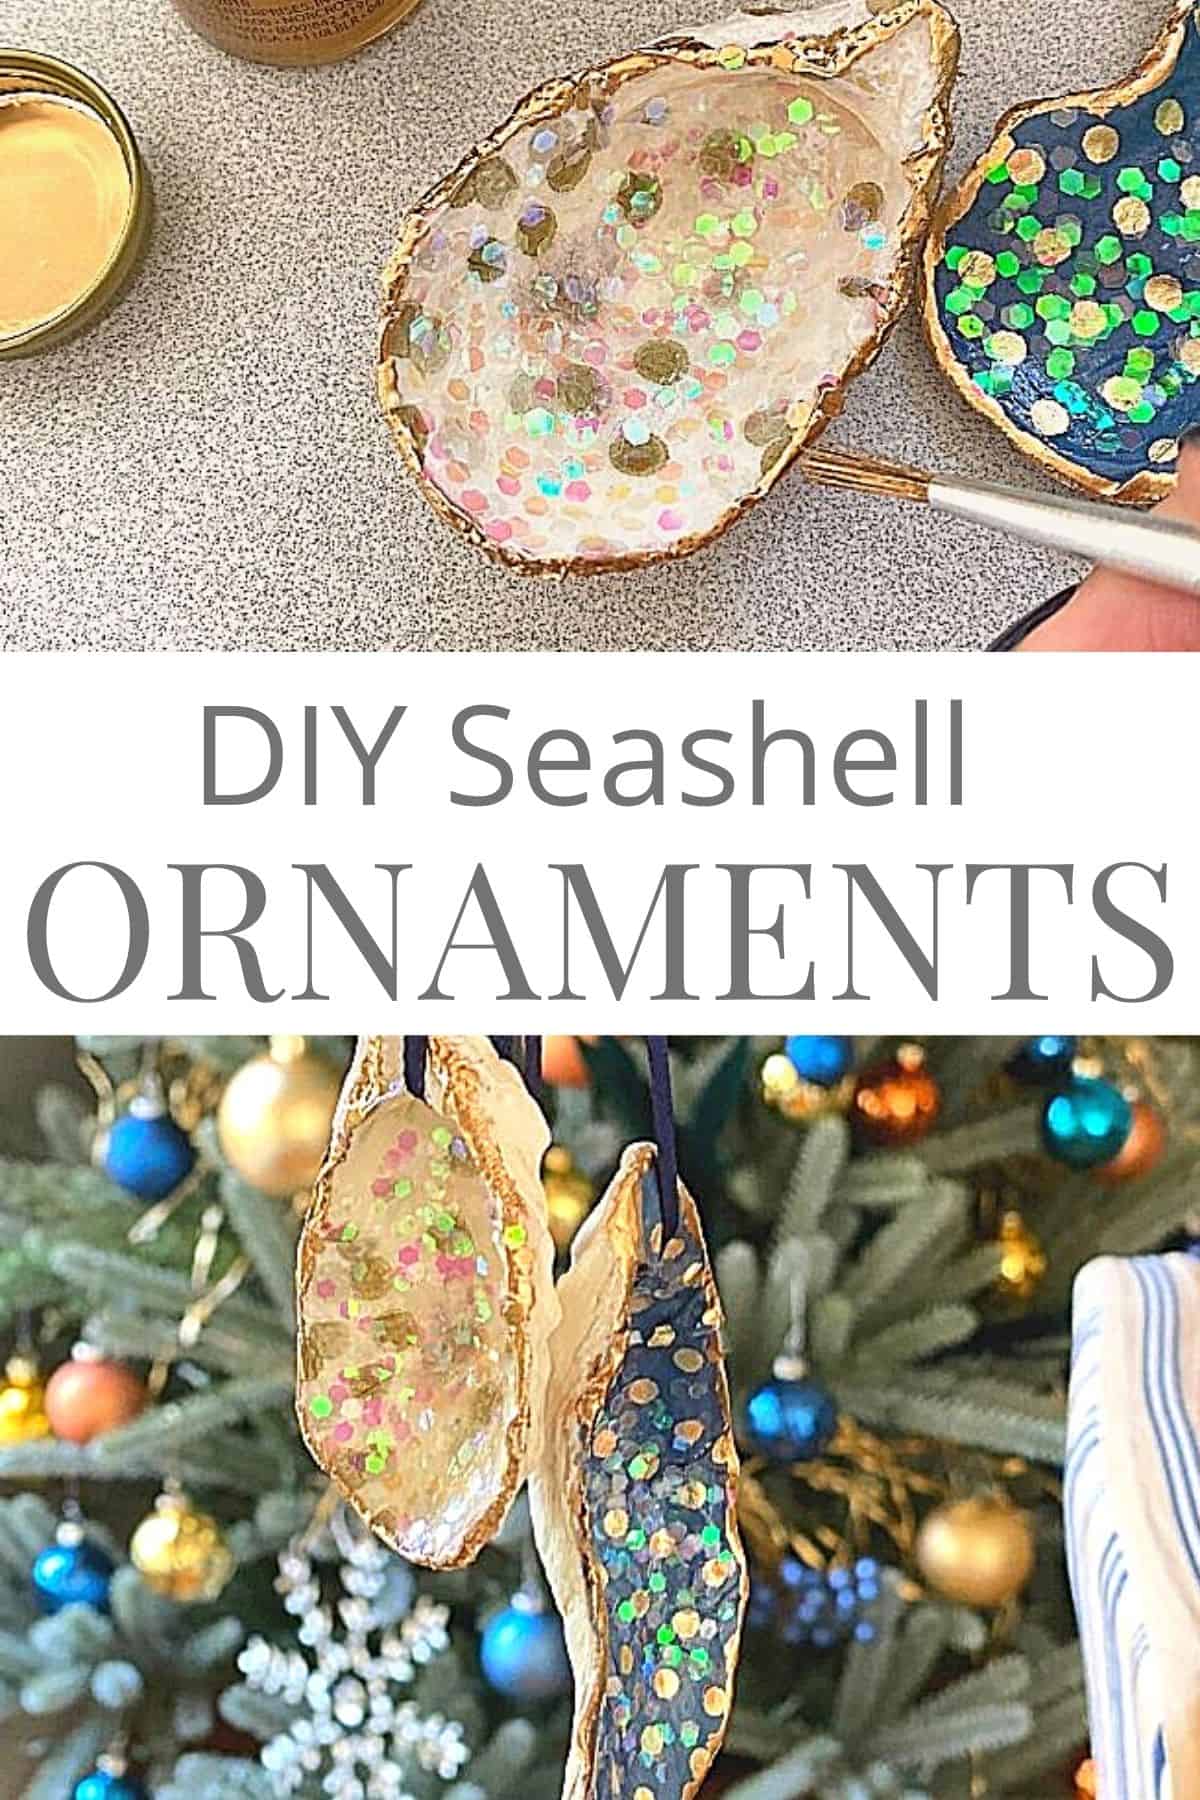 painting DIY shell ornament and 2 completed seashell ornaments